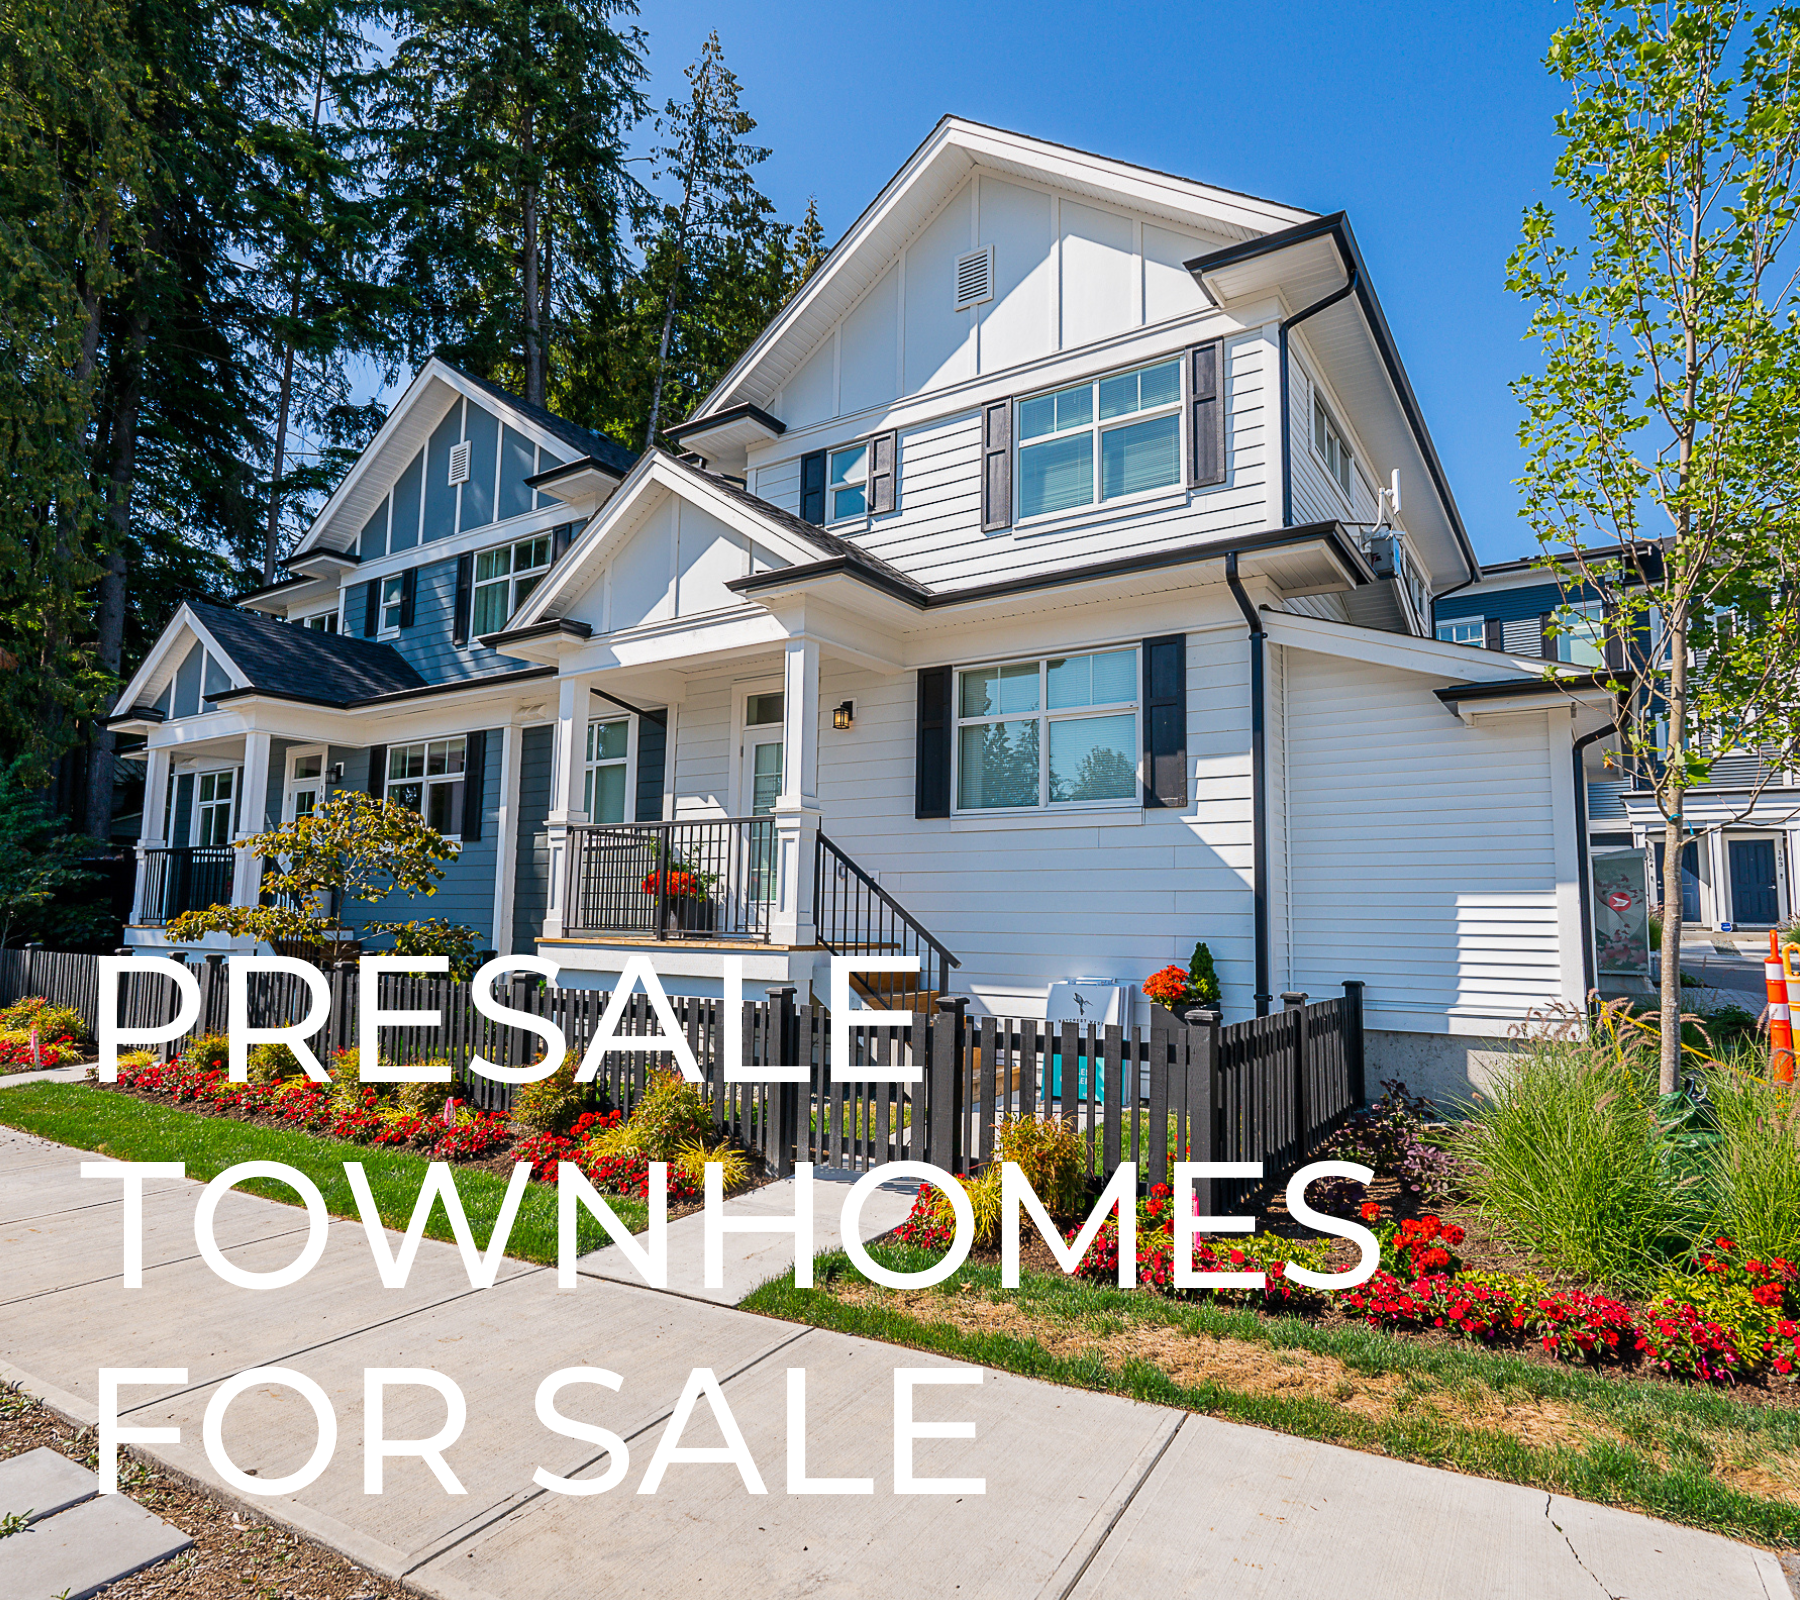 Burke Mountain Presale Townhomes and Condos For Sale Top Coquitlam Realtor